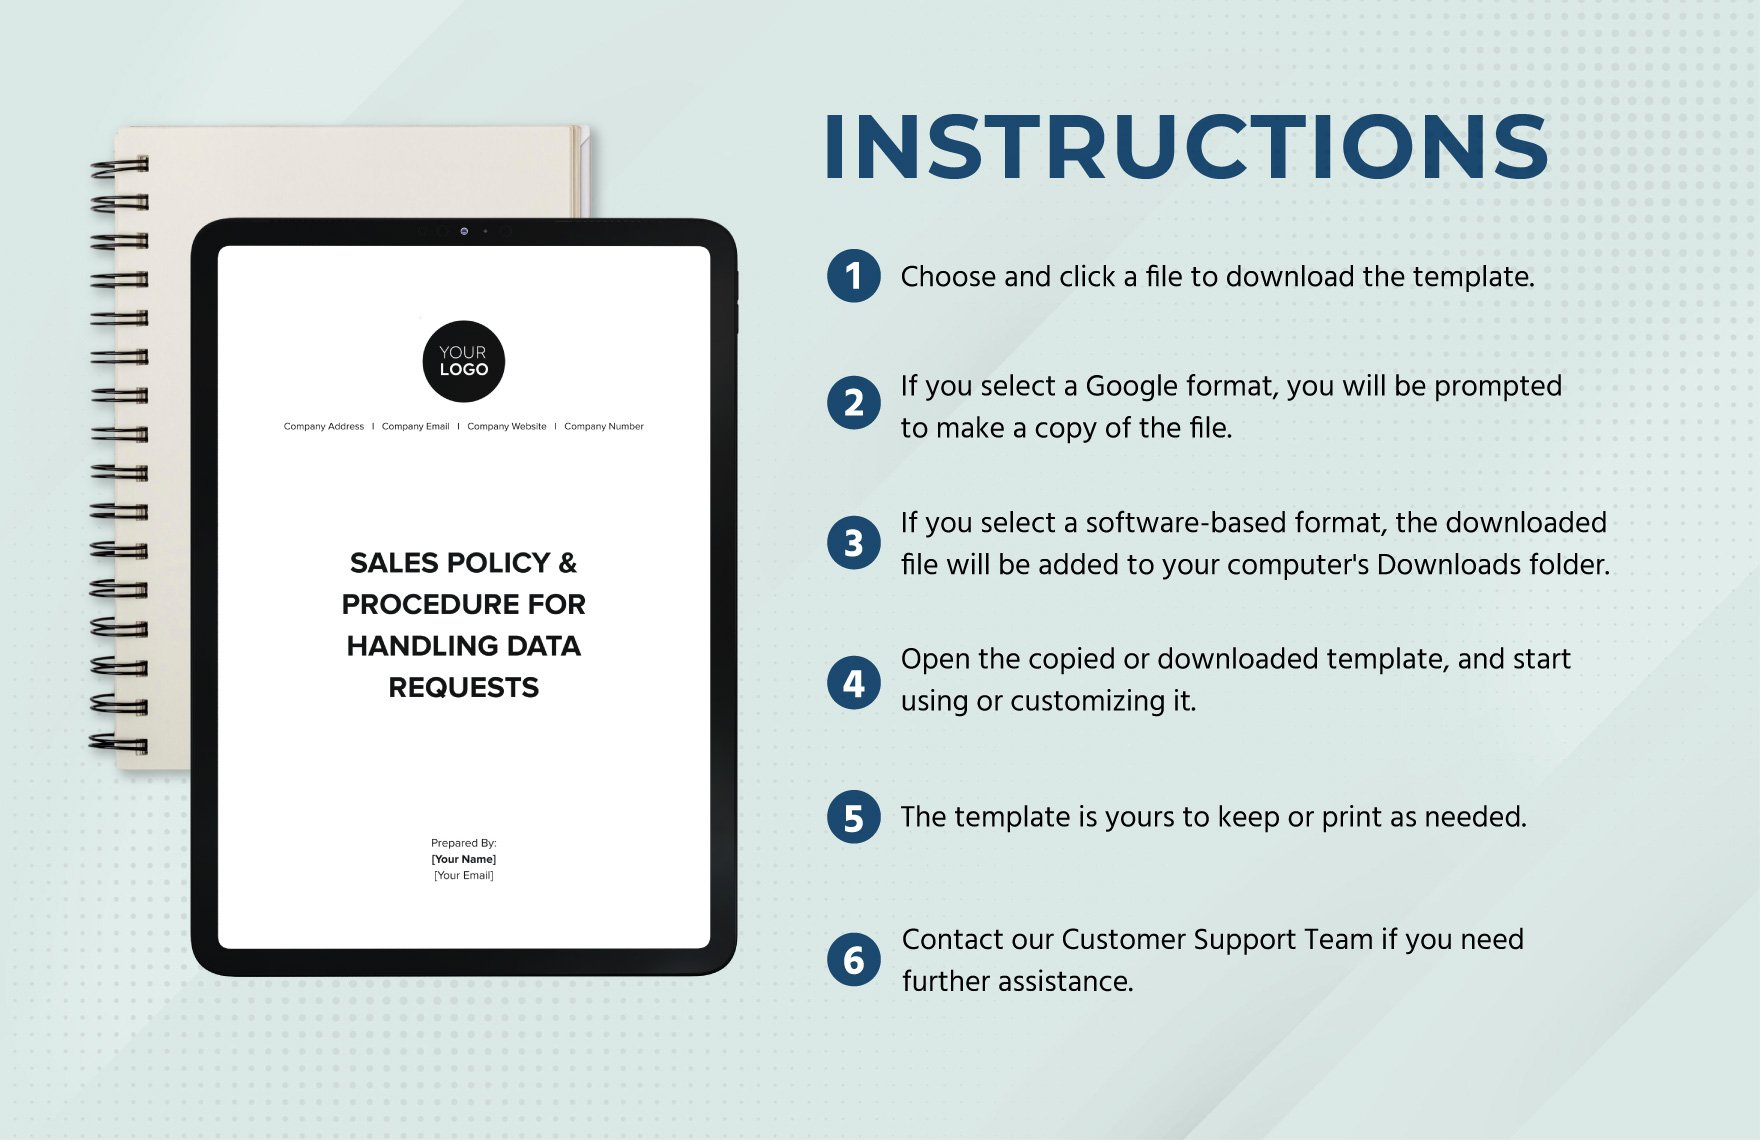 Sales Policy & Procedure for Handling Data Requests Template